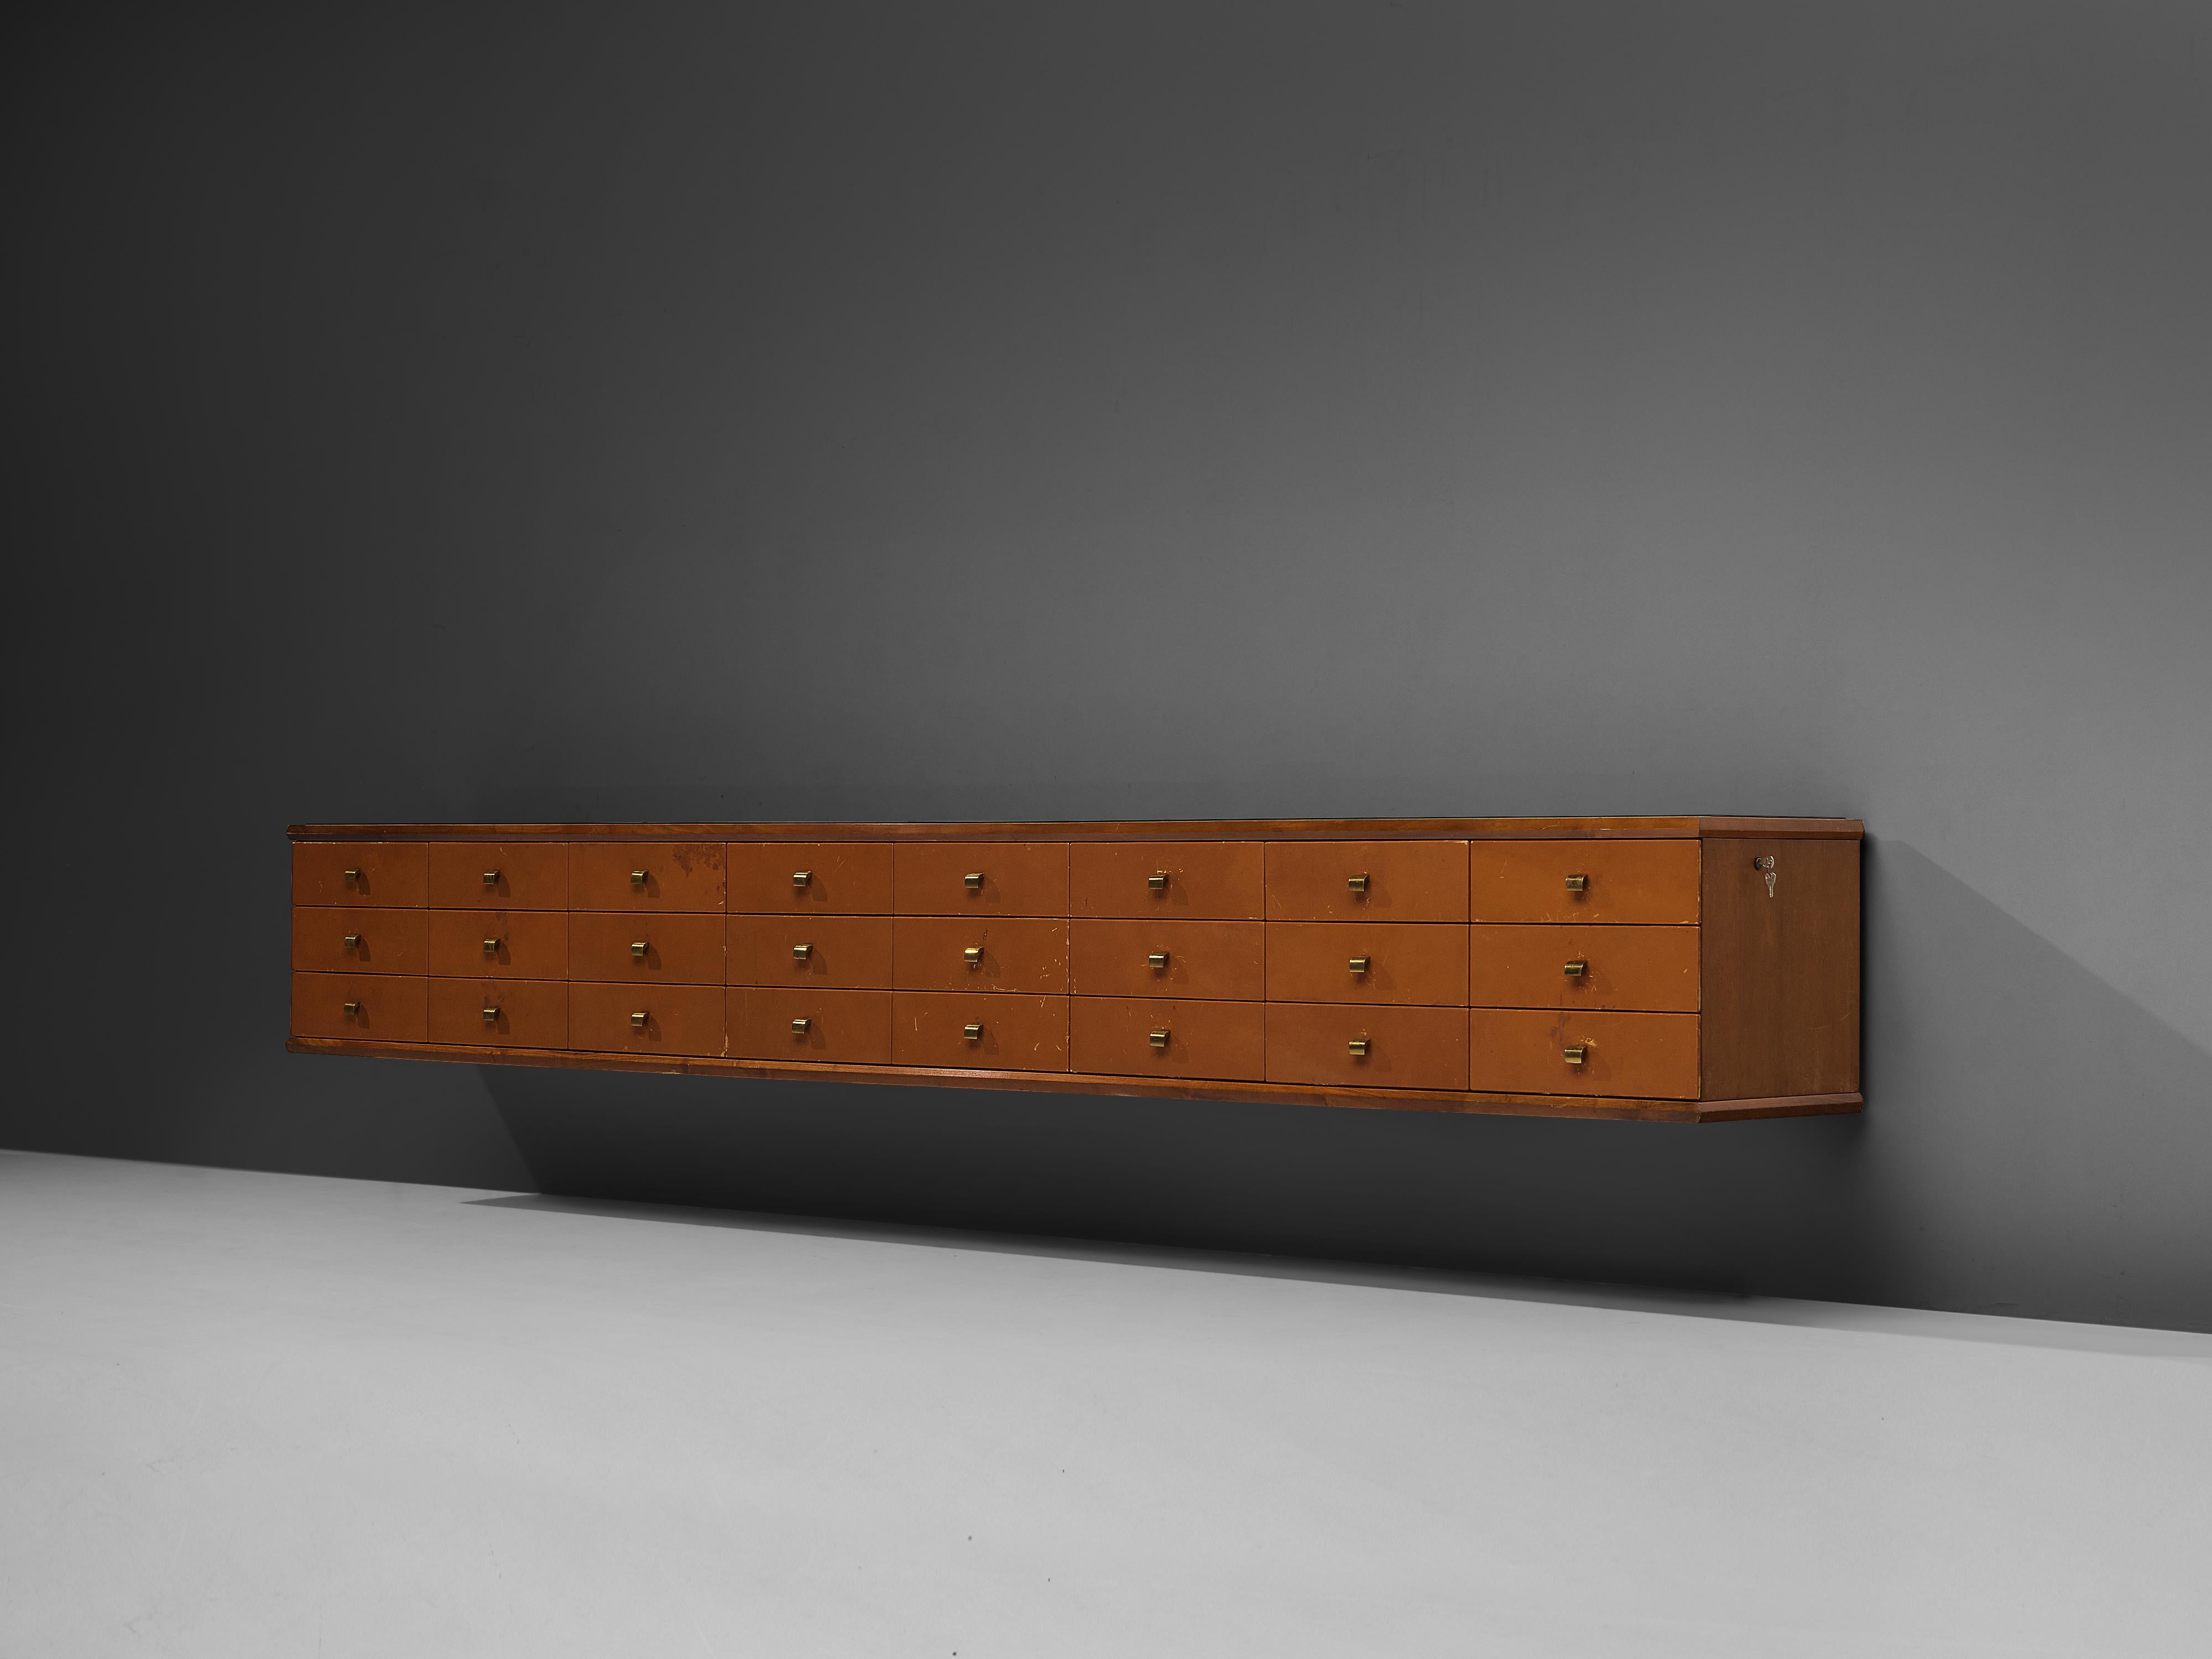 Sideboard, leather, brass, glass, walnut, Italy, 1960s

Large wall-mounted sideboard with drawers. This 11 ft. sideboard is manufactured in walnut wood and has a black glass top. The key feature are the many drawers. Even though they all seem to